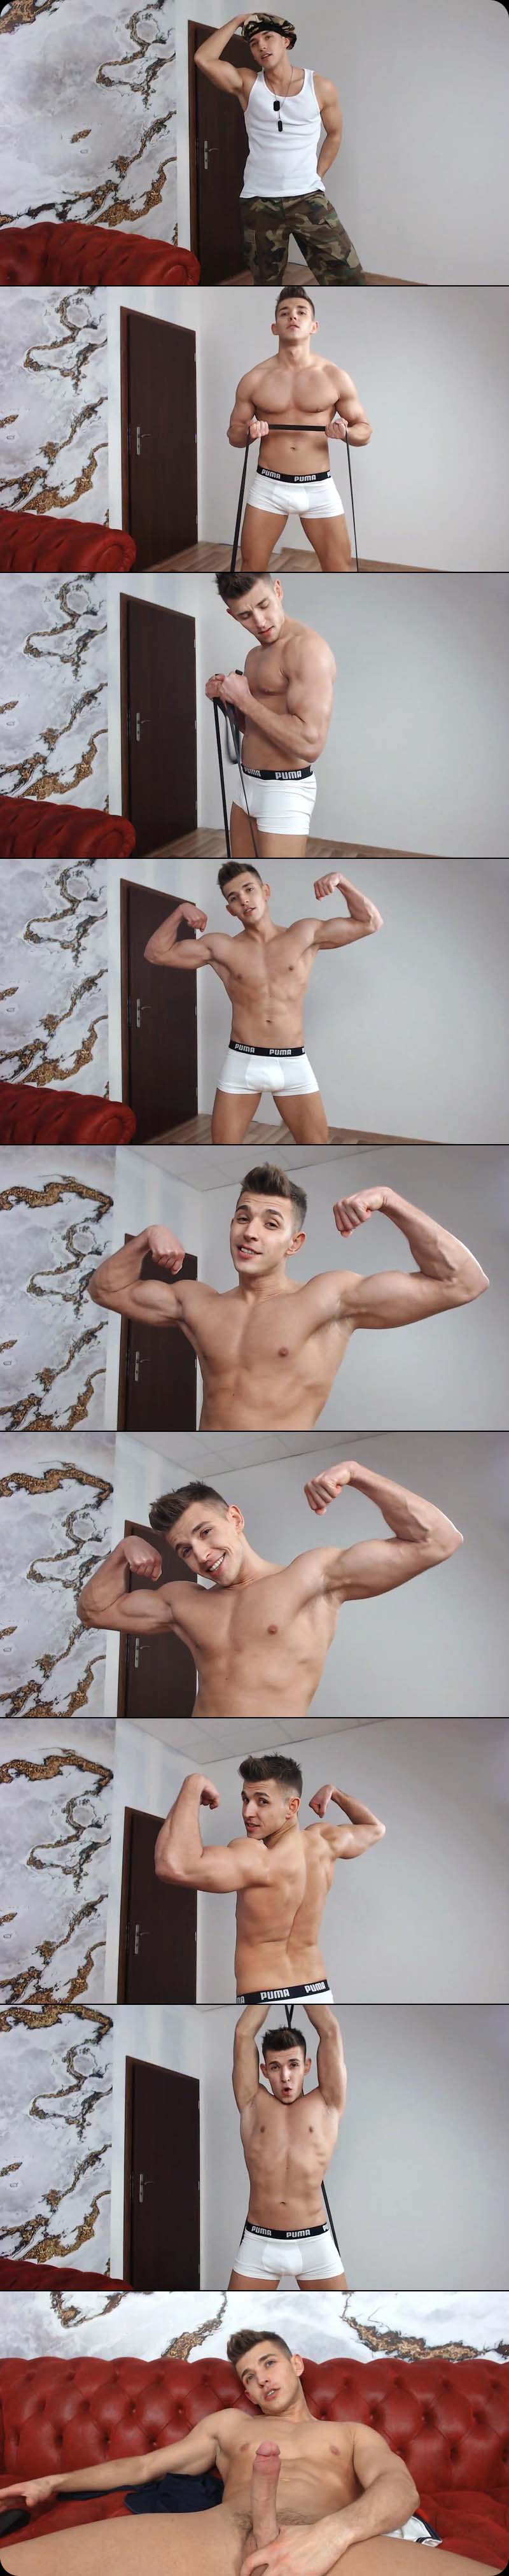 Mario Texeira's Chat Show at BelAmiOnline.com